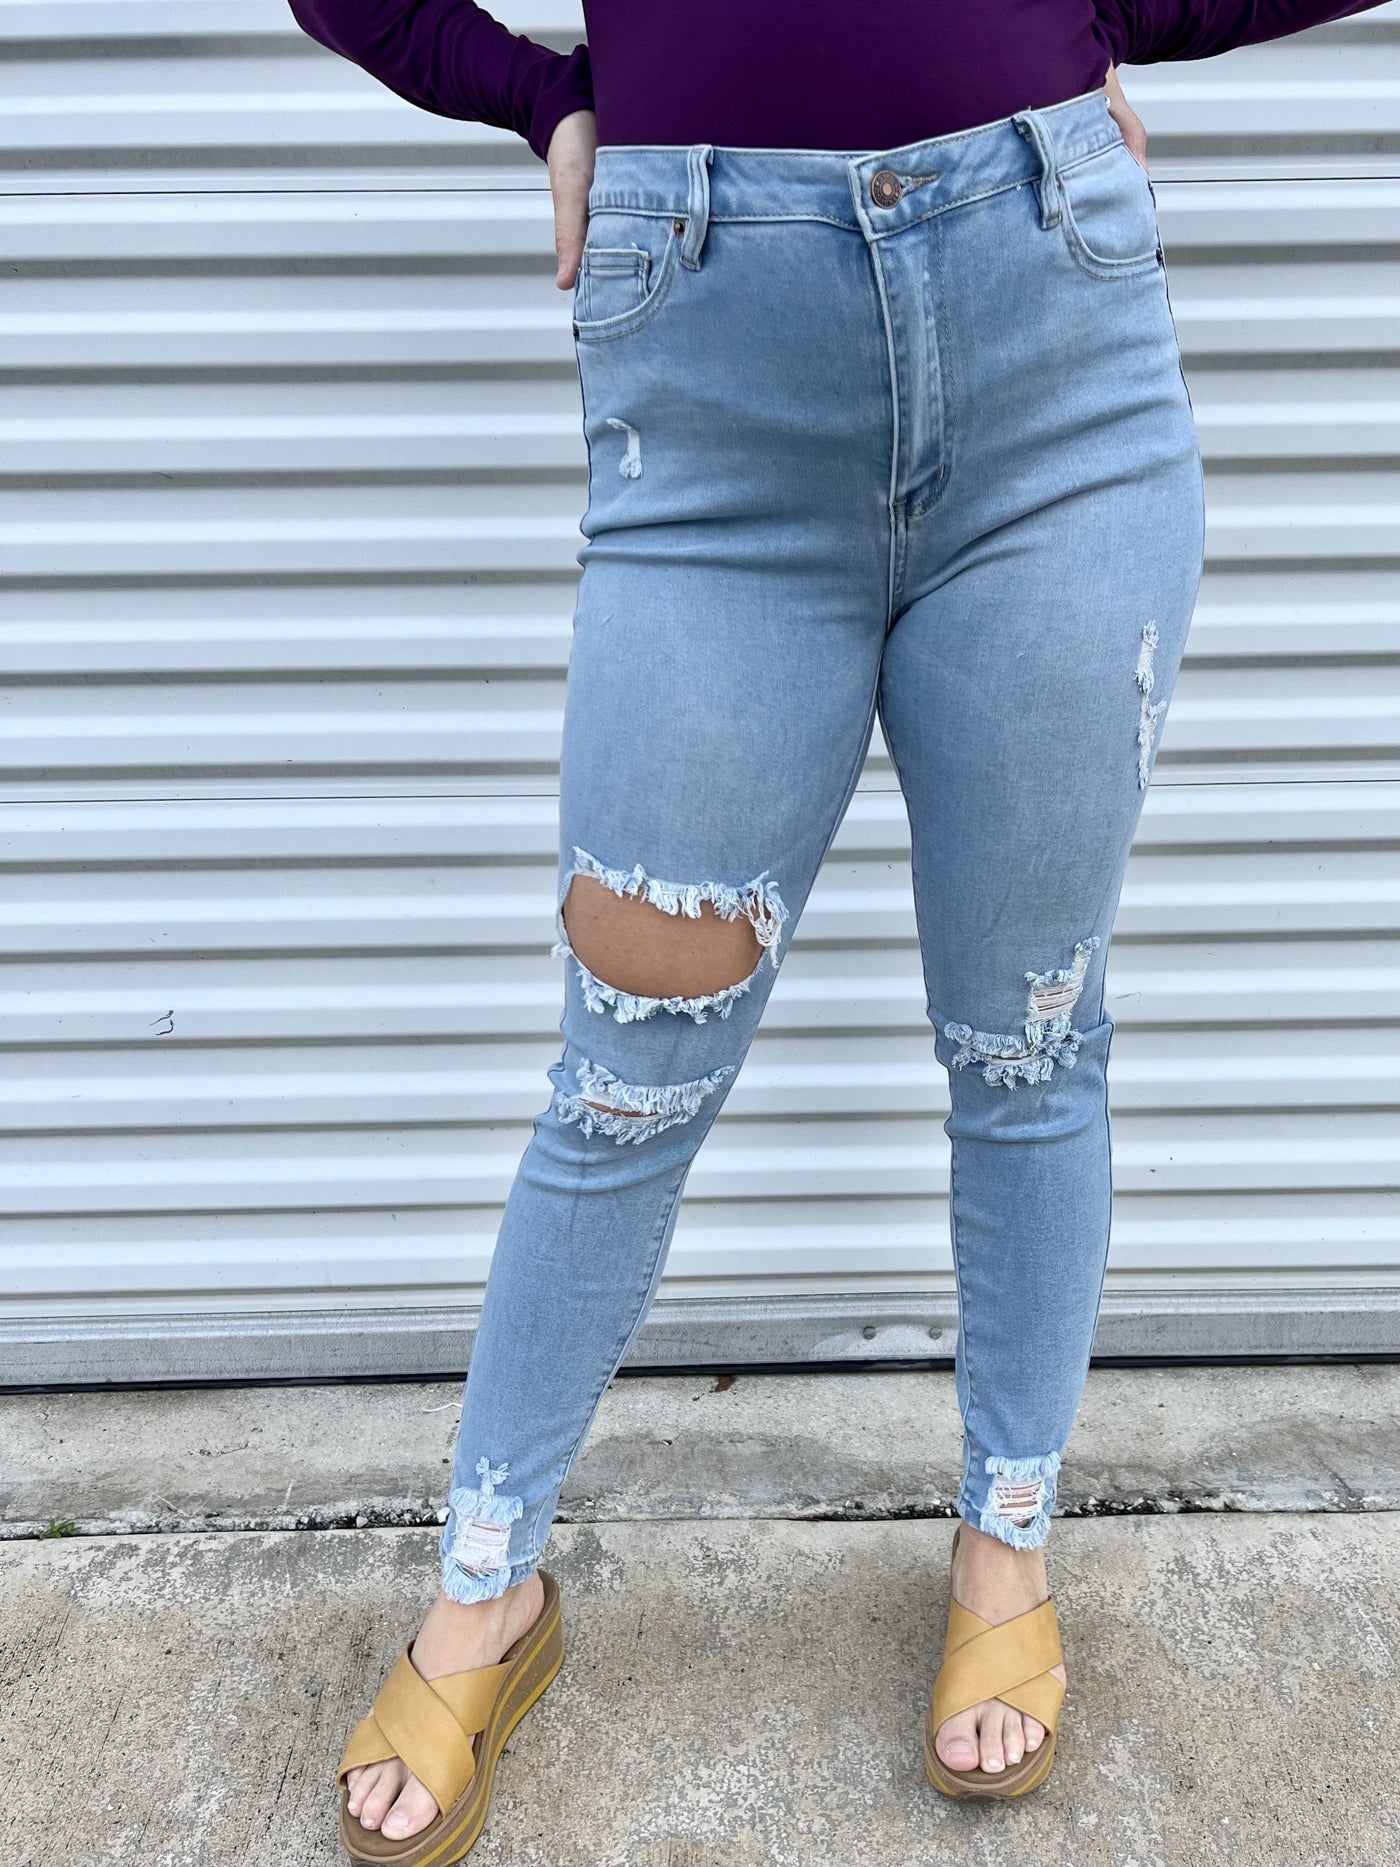 Form Fitting Skinny Jeans